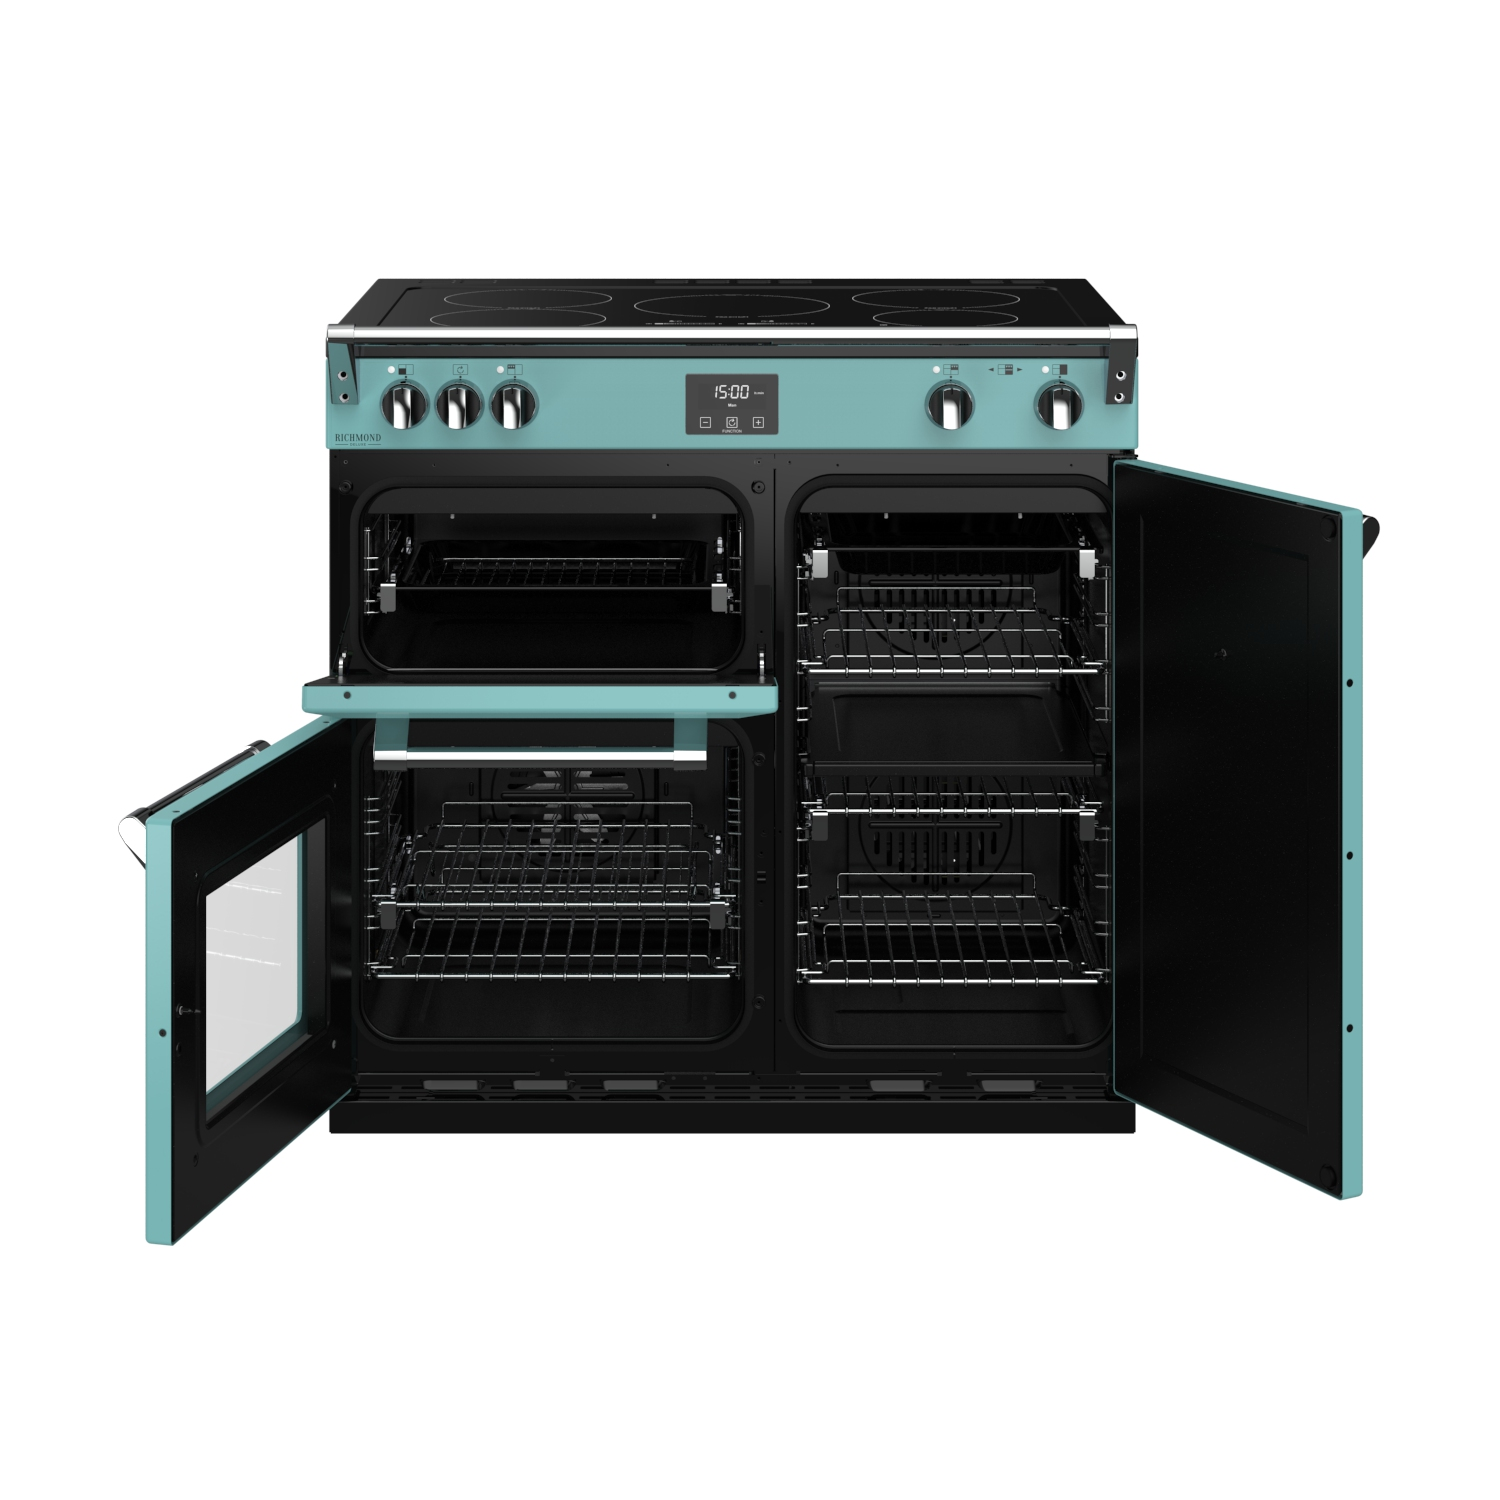 STOVES Richmond 164 Liter) S900 Induktion, (EEK Blue/Chrom A, EI Induktion Country Deluxe Standherd